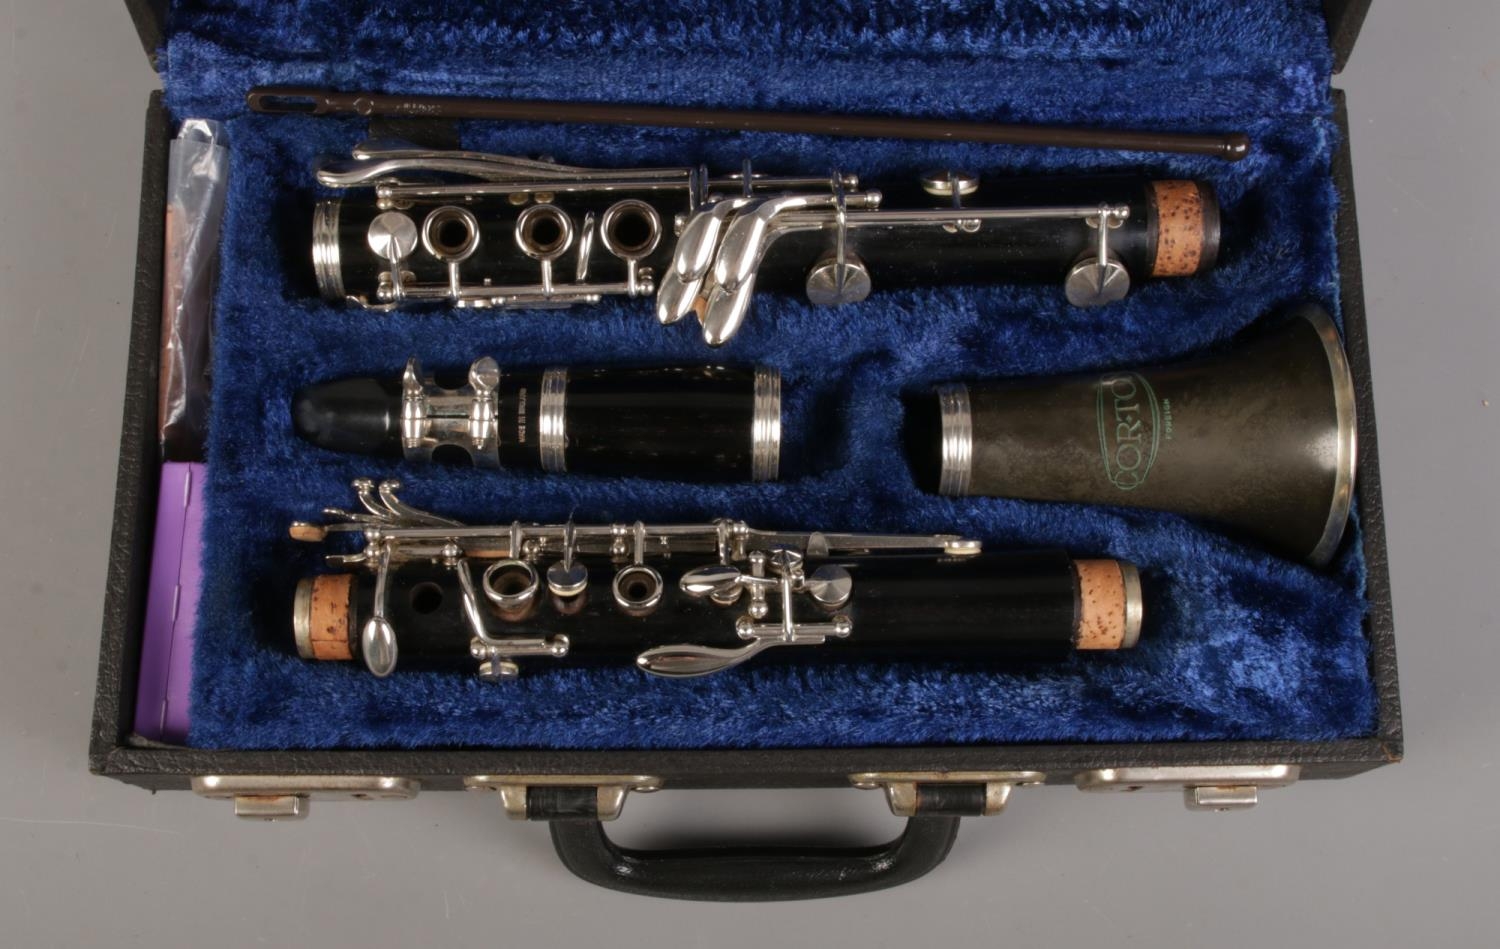 A cased Corton clarinet, with Calteau mouthpiece and accessories. - Image 2 of 3